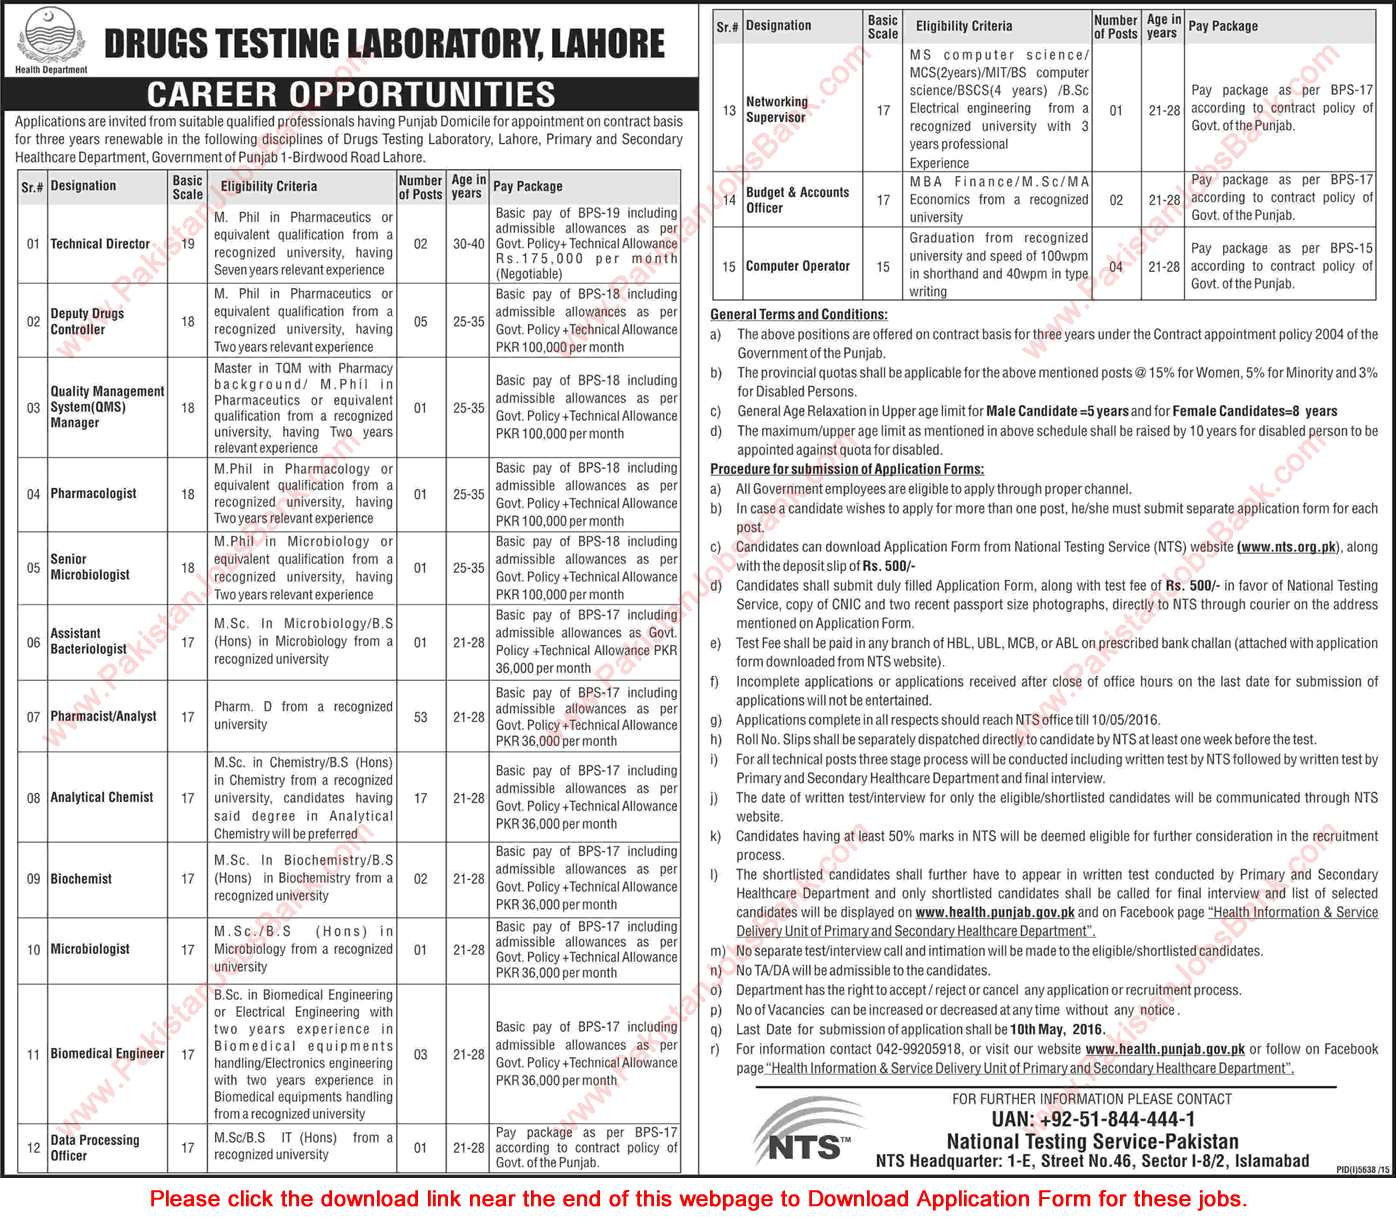 Drugs Testing Laboratory Lahore Jobs 2016 April NTS Application Form Pharmacists, Analytical Chemists & Others Latest